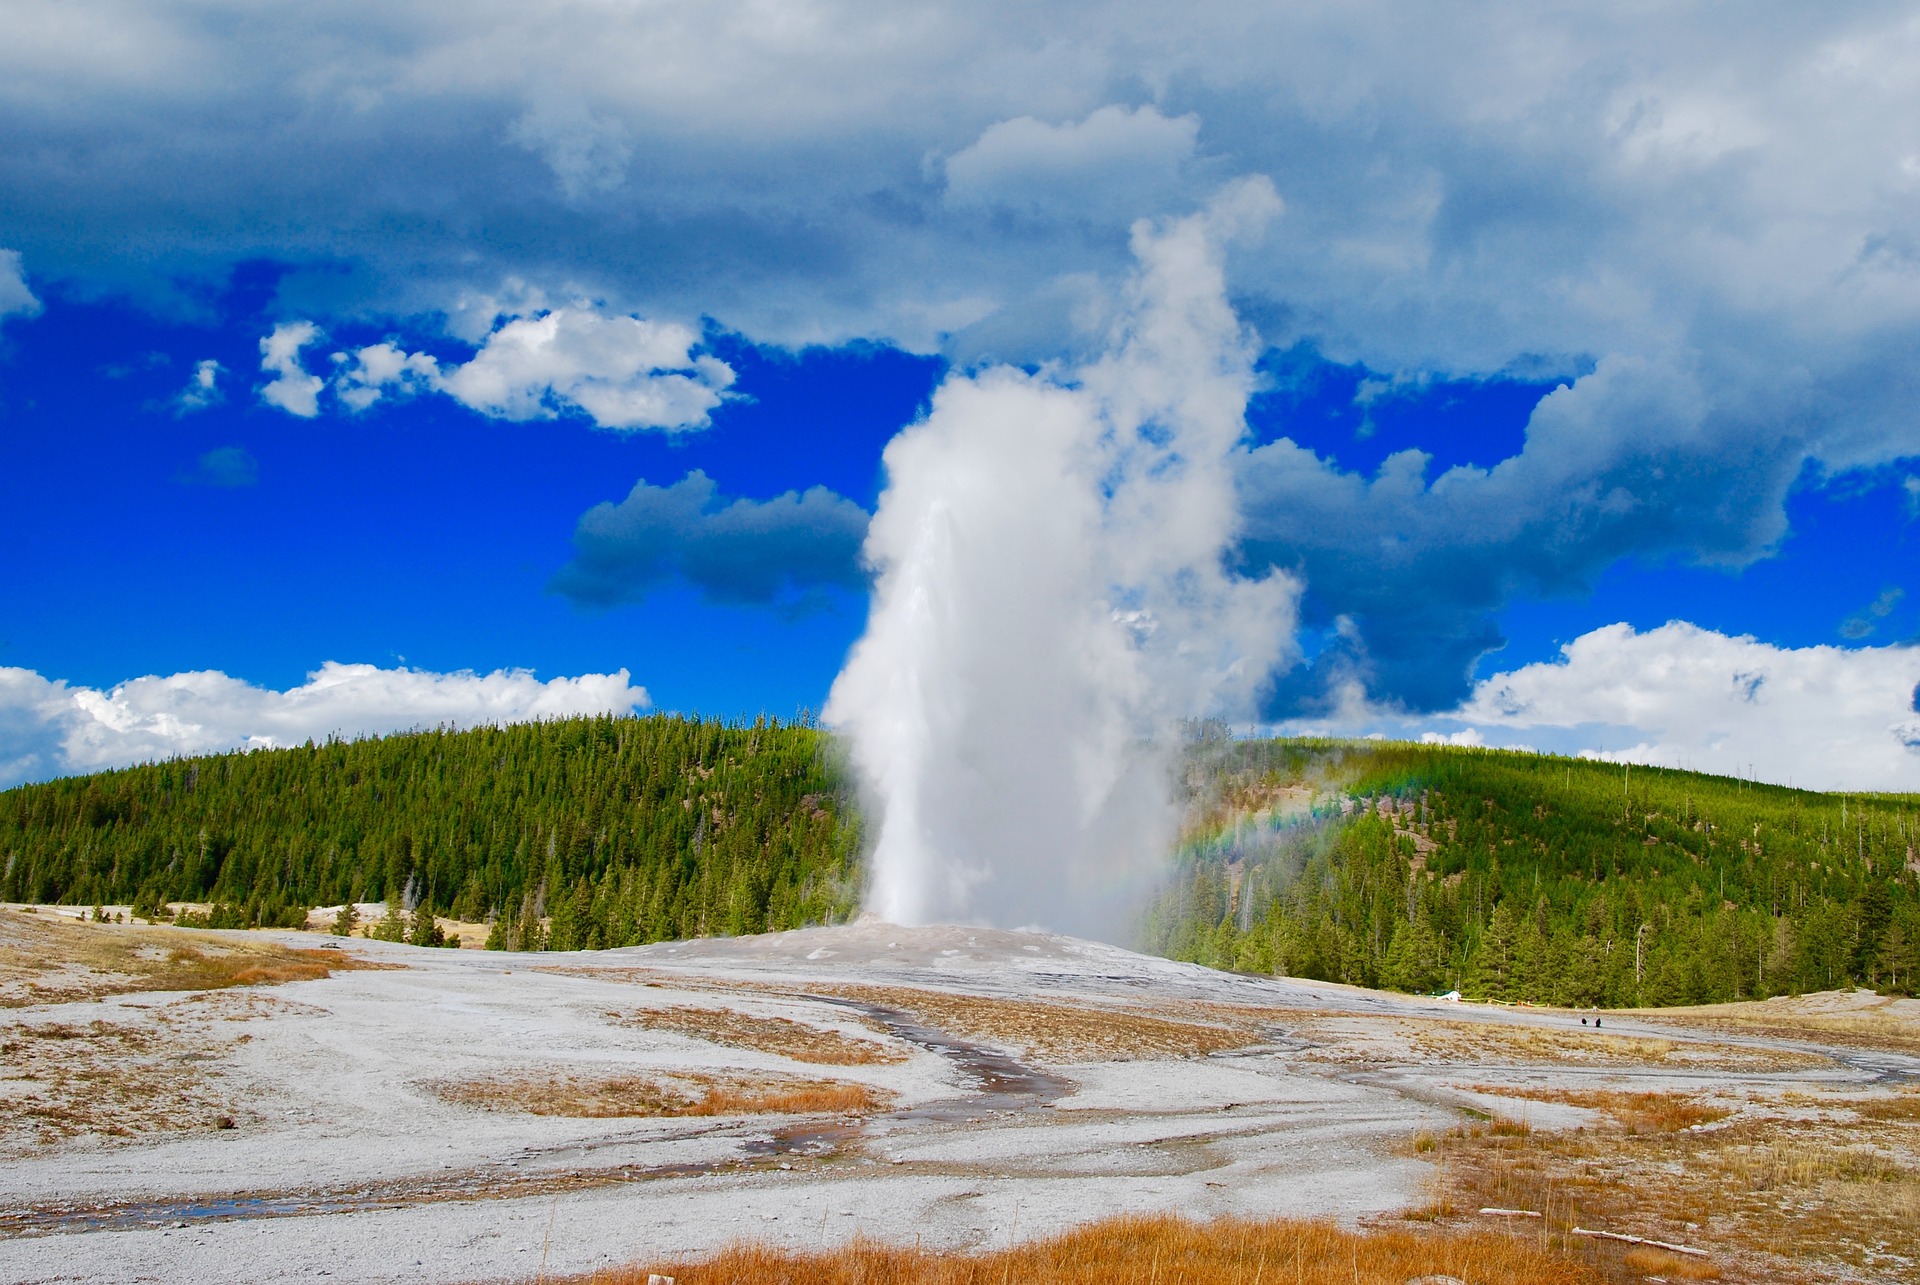 in which us state would you visit old faithful